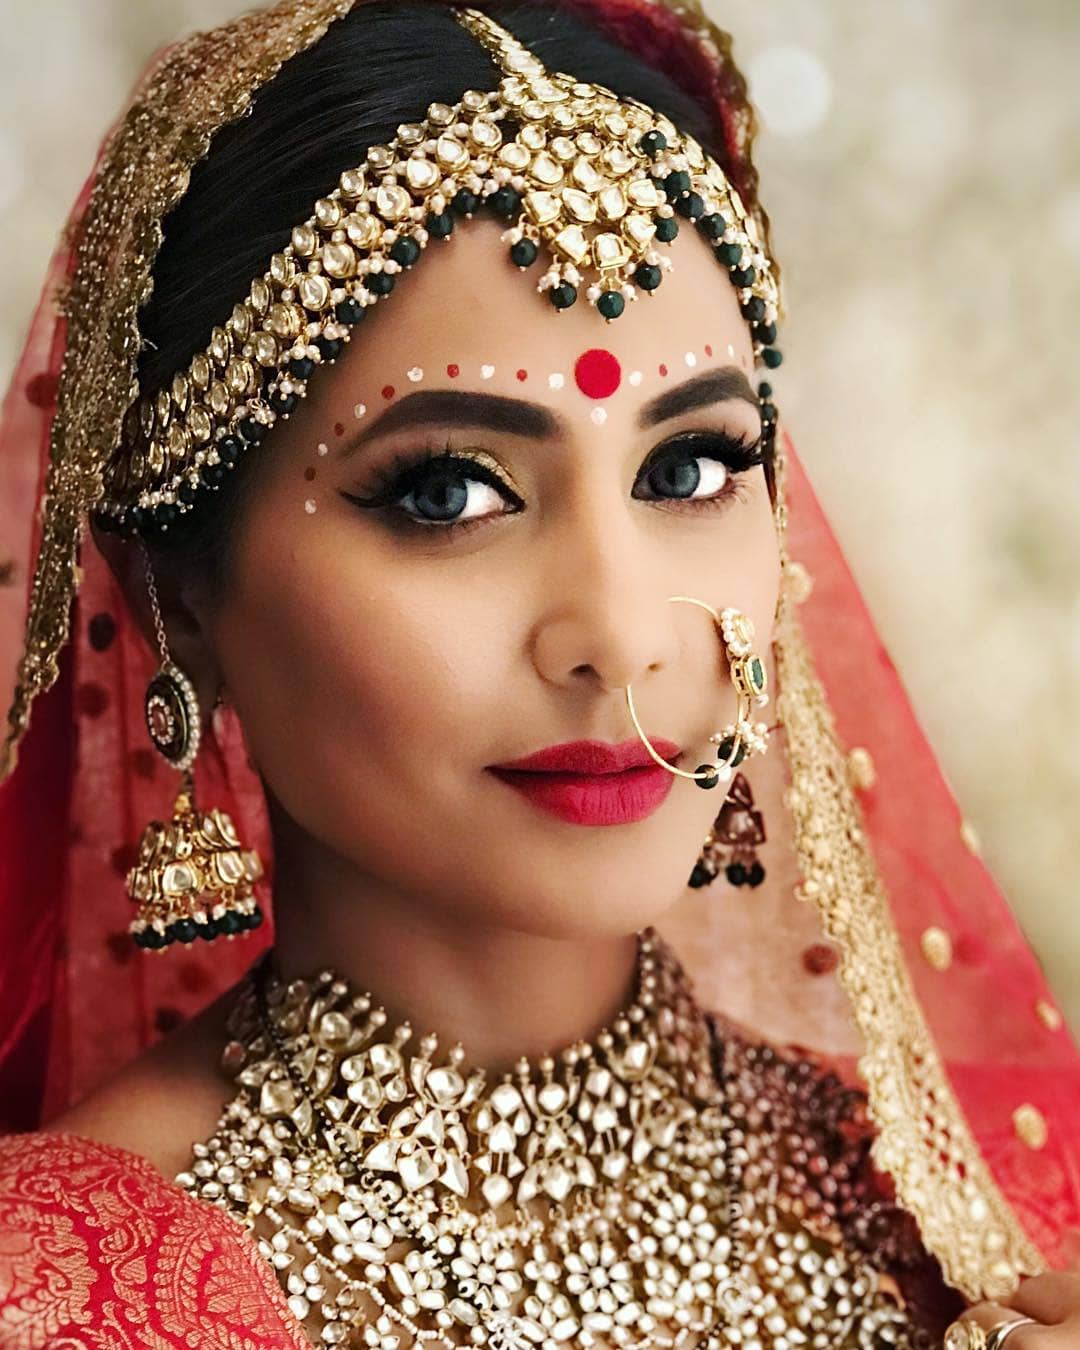 Hina Khan in Bangali makeup look: Best Bridal Makeup Inspirations to bring out Diva in You